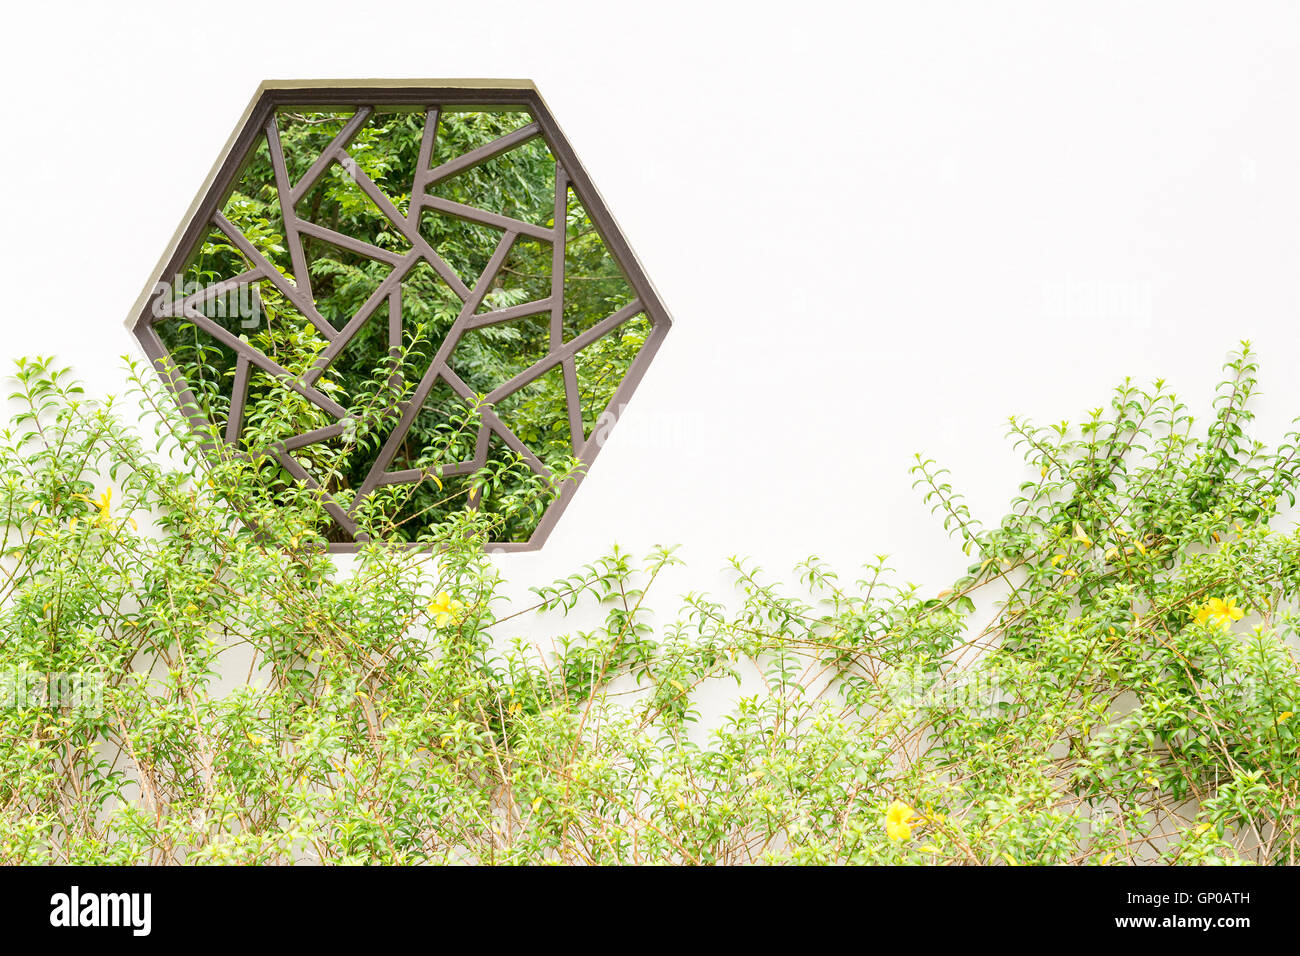 Chinese hexagon style window on the wall at backyard gardening, copy space. Stock Photo